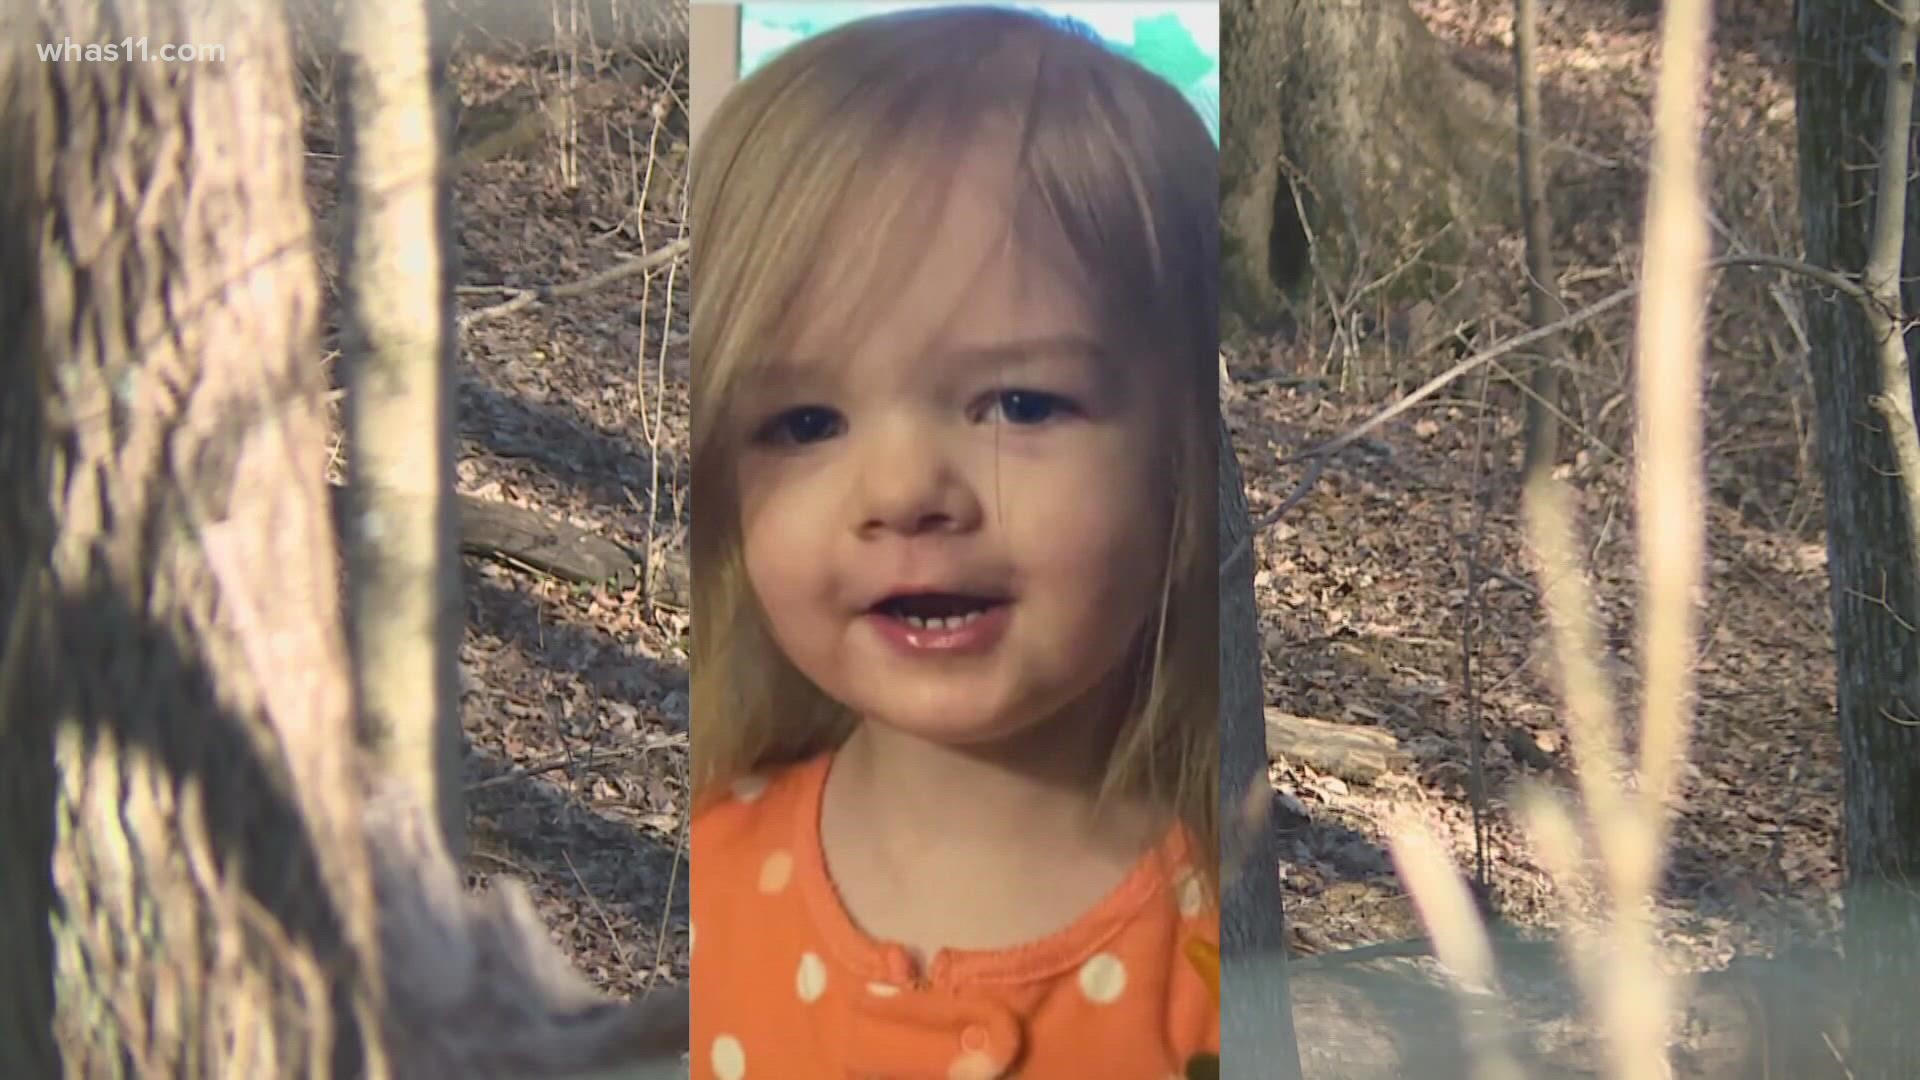 Serenity McKinney was found dead in February. Officials said they are still waiting on results from DNA testing before releasing her body.